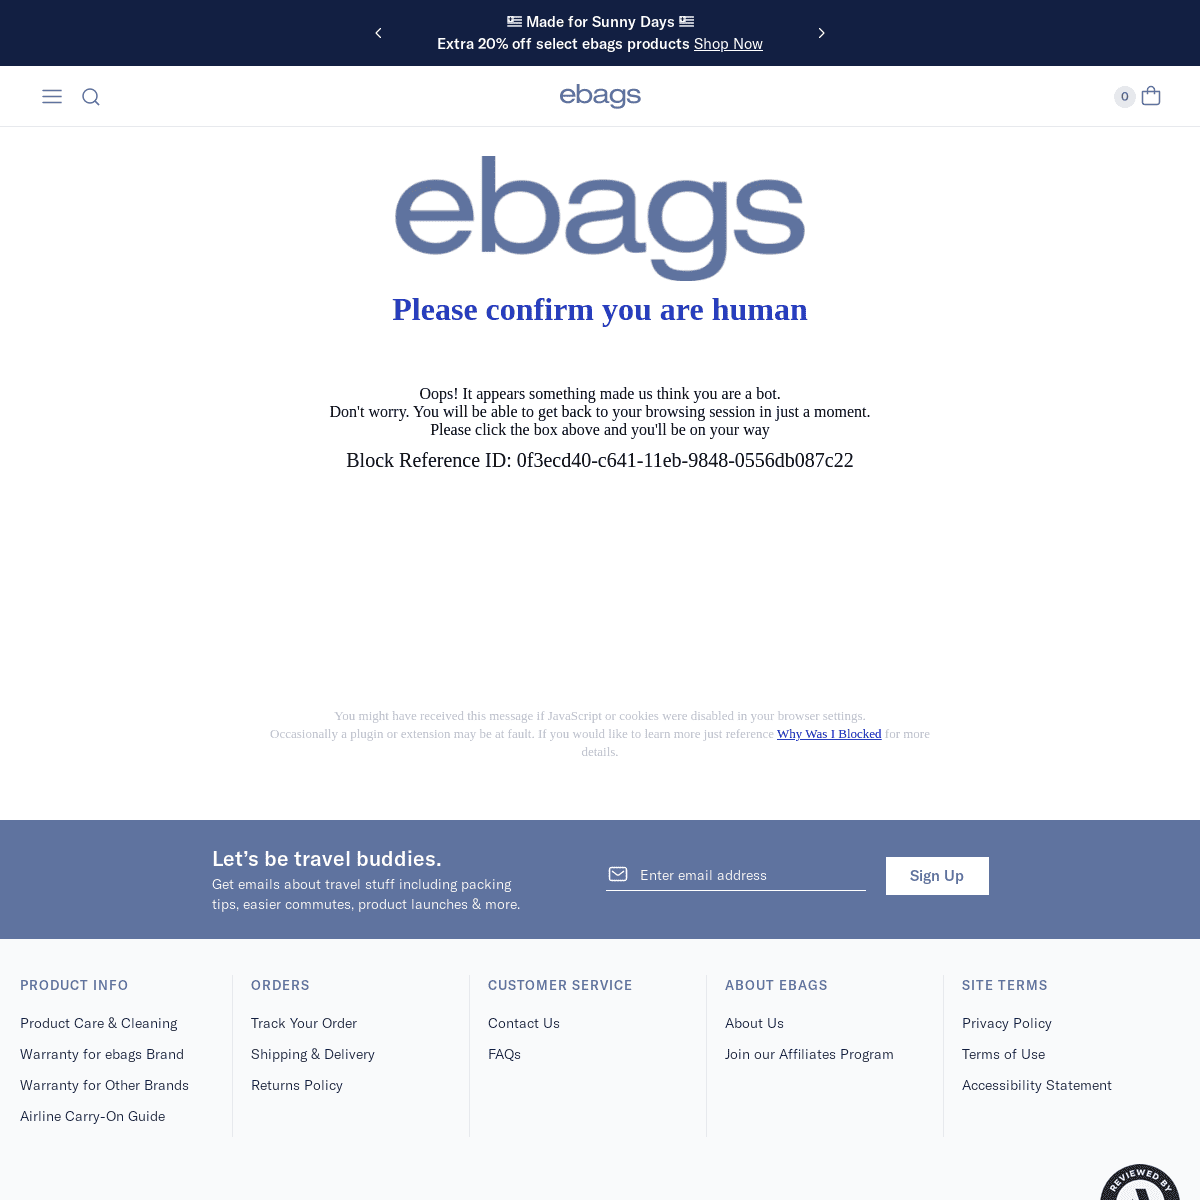 A complete backup of https://ebags.com